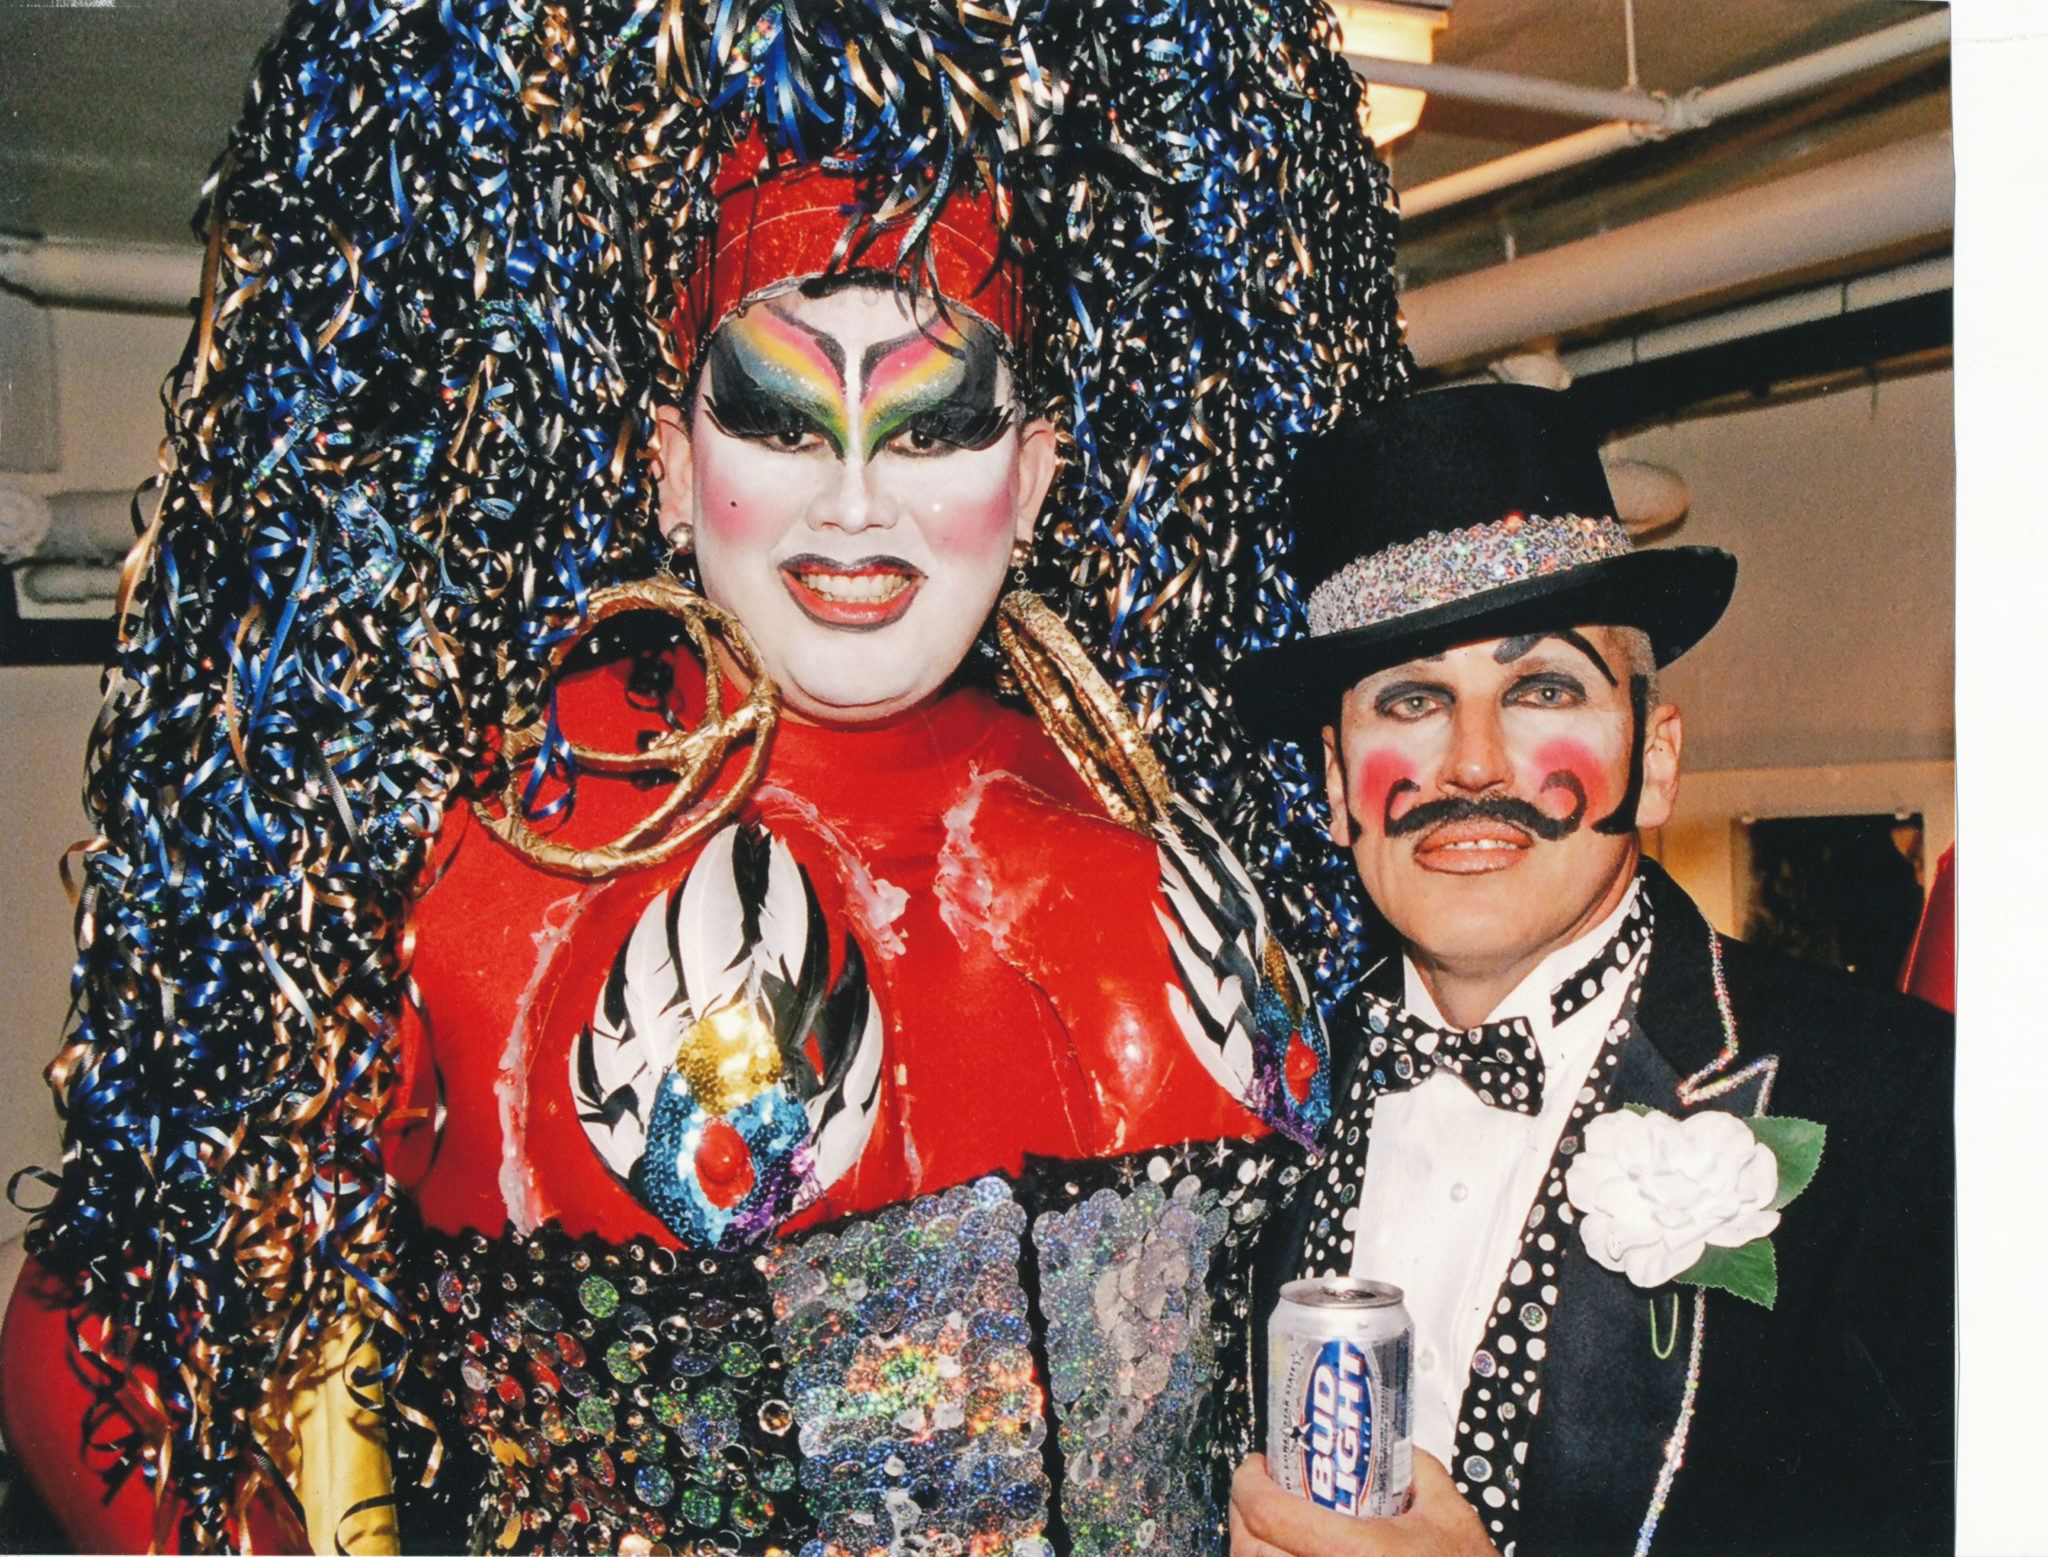 Designer Rene Roberts and Michael Marmontello backstage. Court of Chaotic Clashing Cultures, 2004.